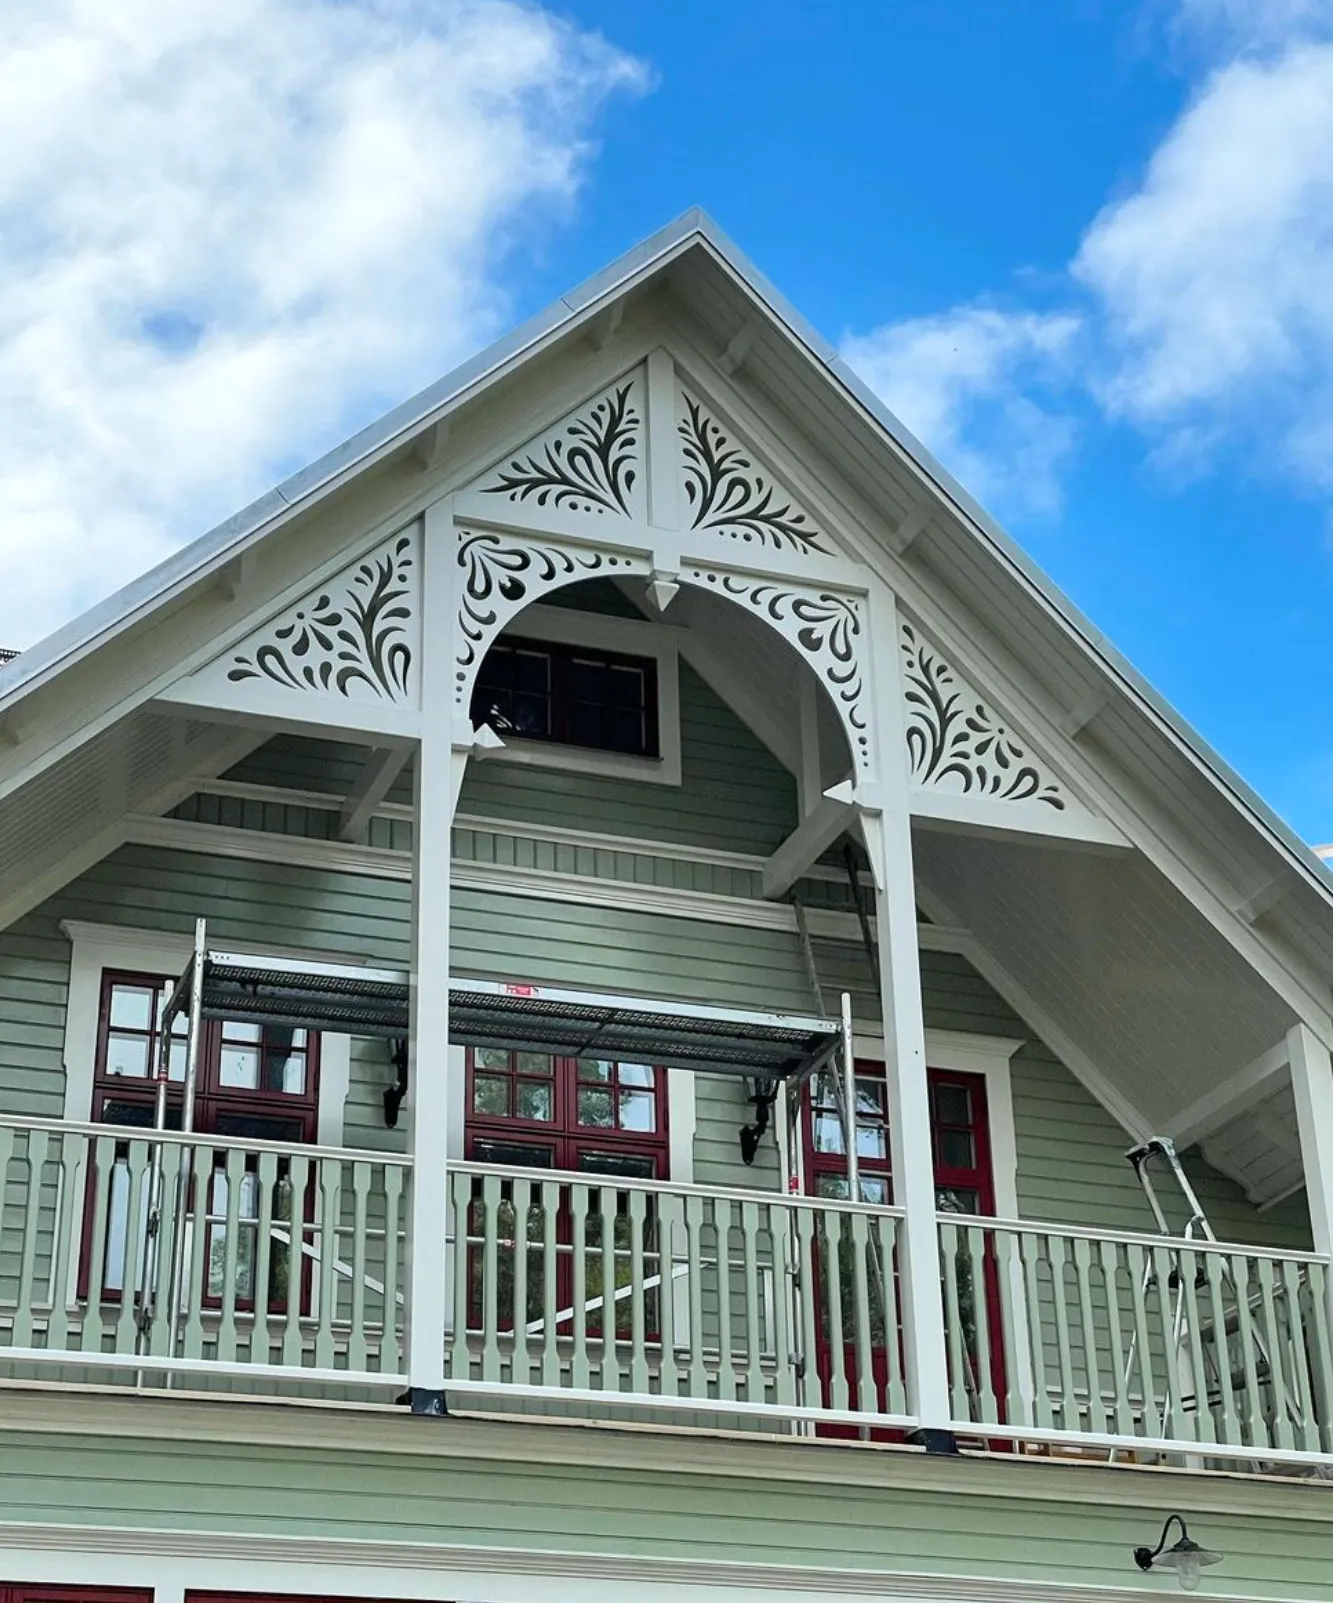 A green house with a porch and a lot of house decoration - wooden brackets - A beautiful turn-of-the-century house inspired by red windows from the turn of the century and 19th-century style - Gaveldekor.